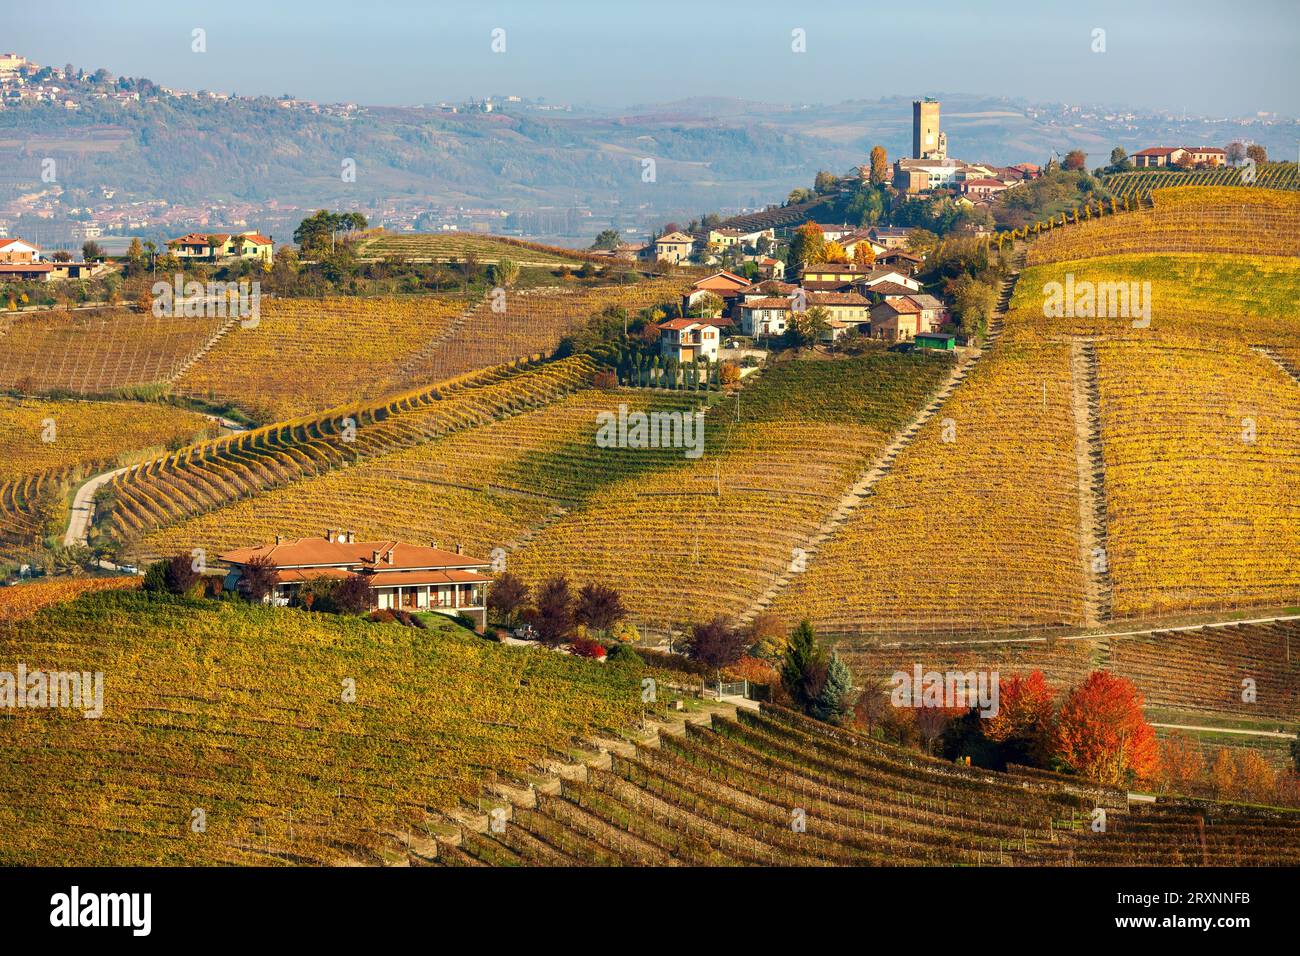 View of the autumnal vineyards and rural houses on the hills near Barbaresco in Piedmont, Italy. Stock Photo